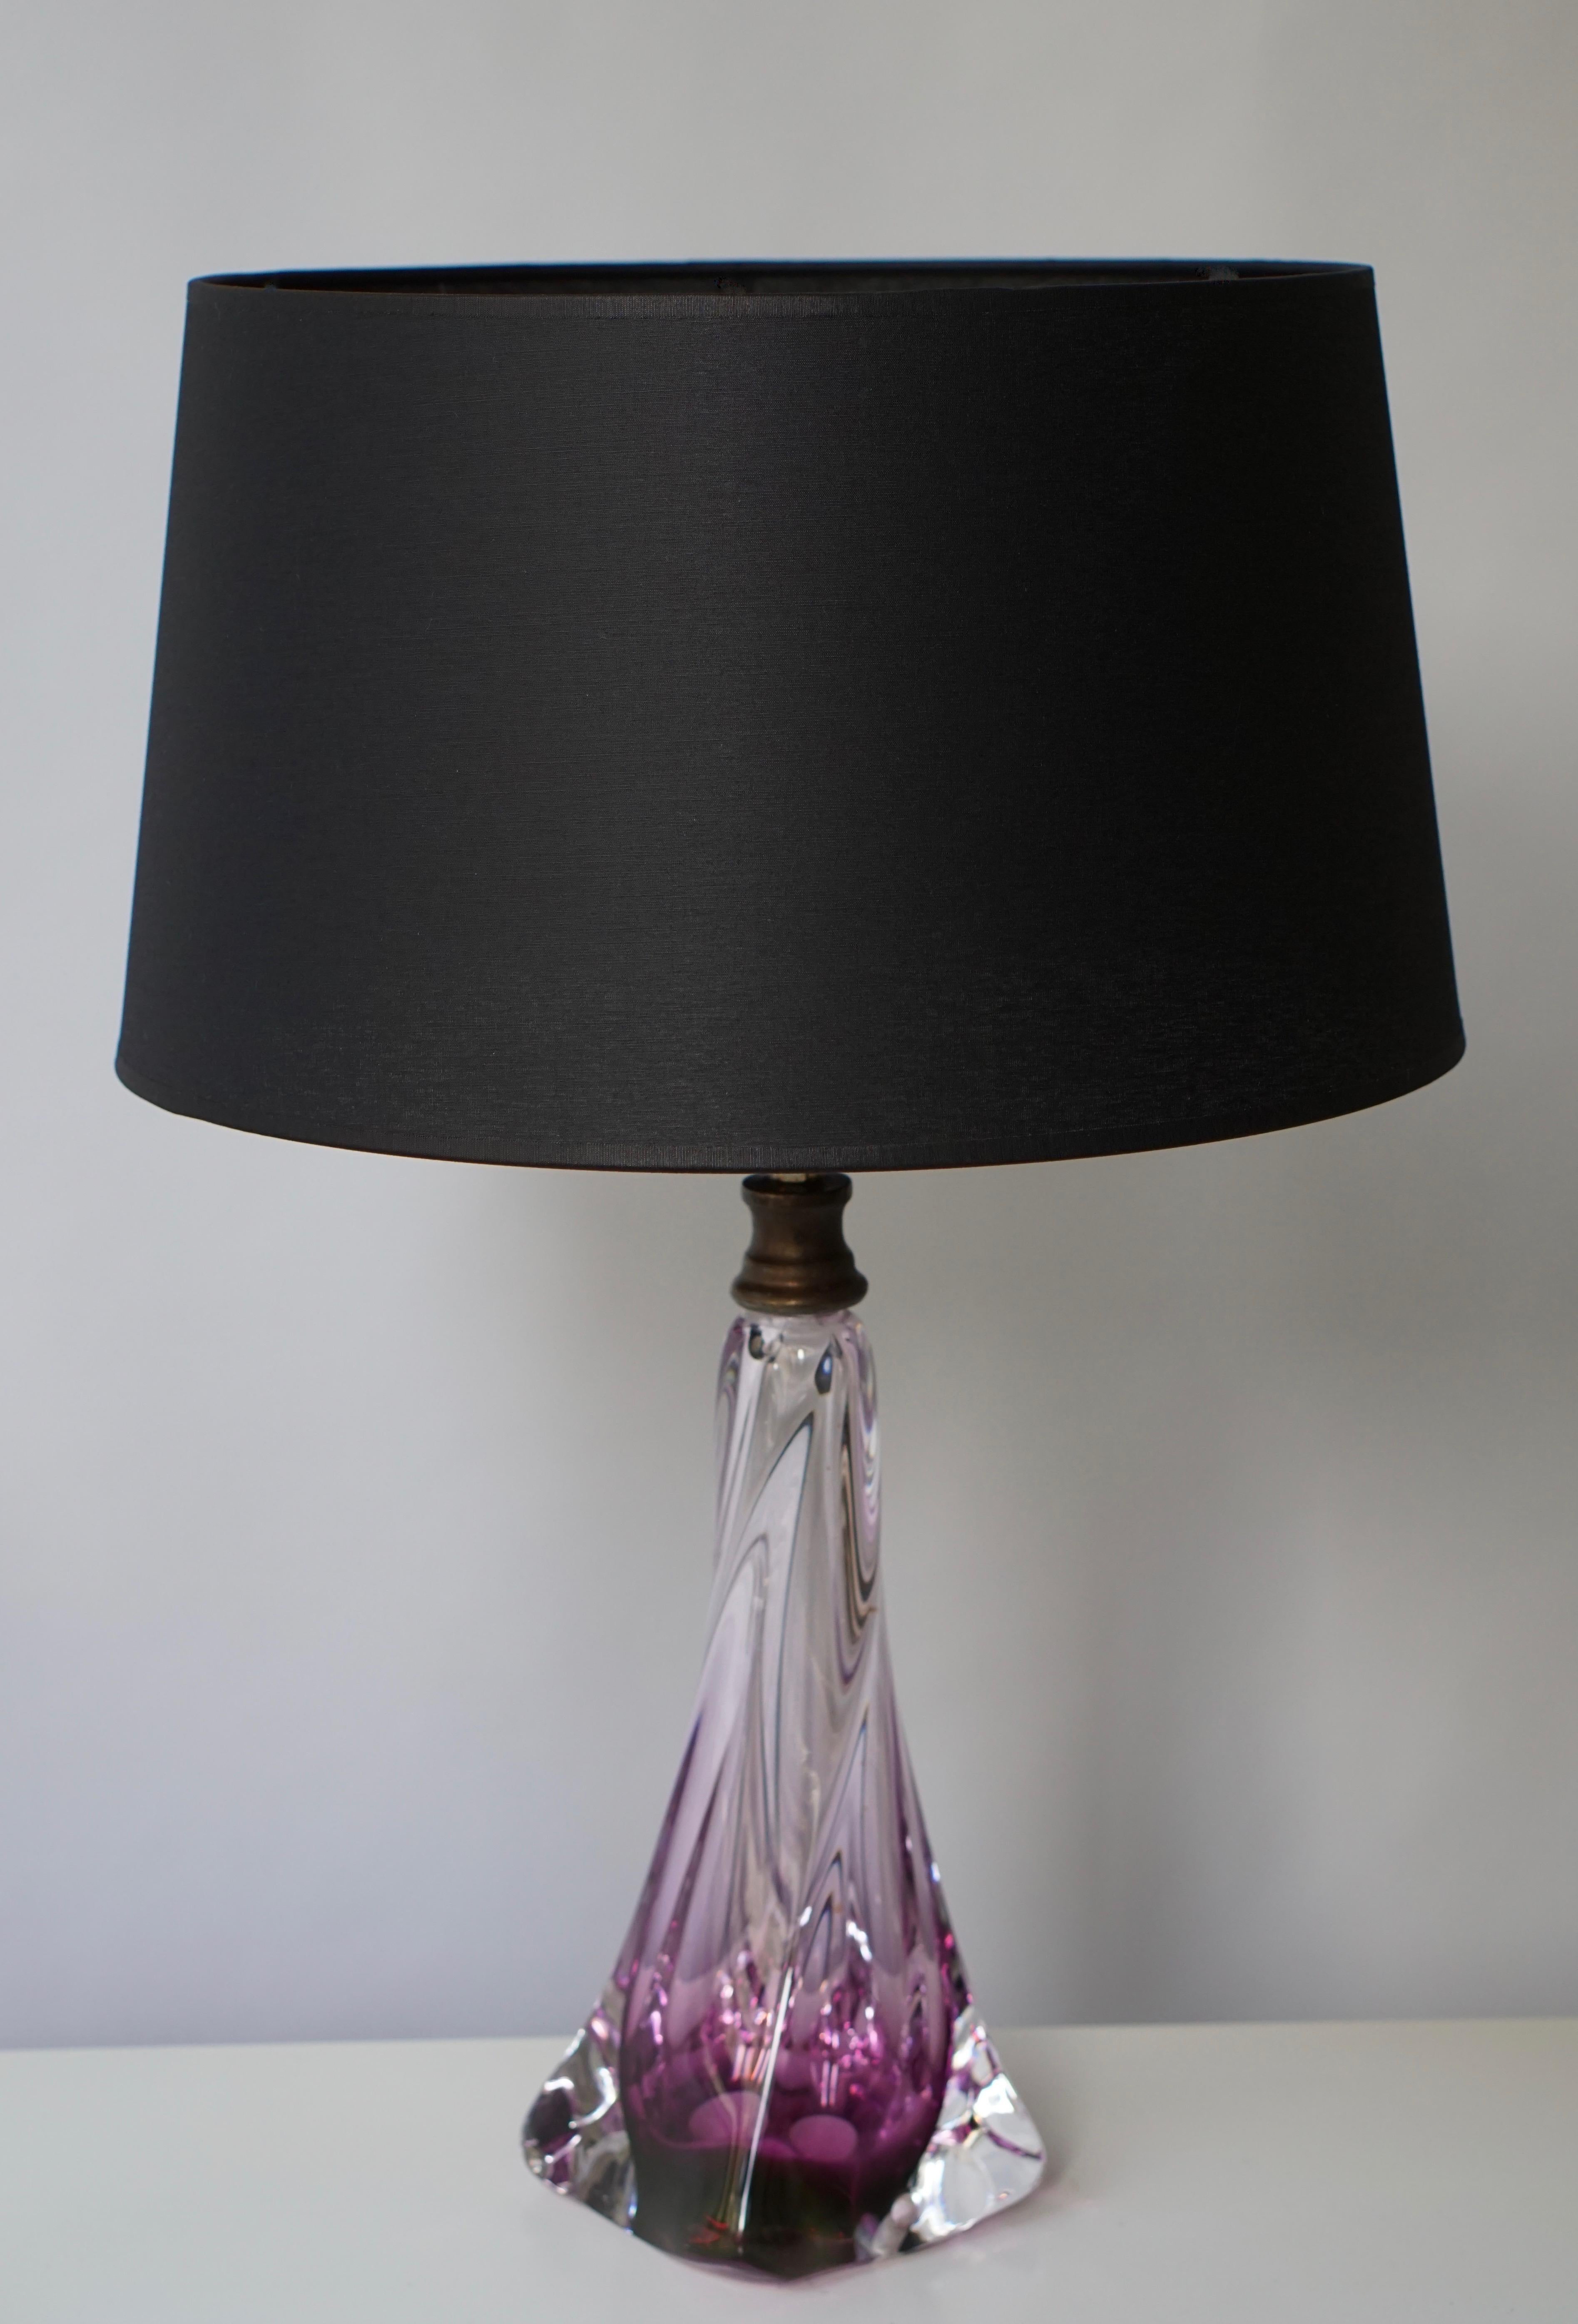 Murano glass table lamp.
Lamp shade are not included in the price.
Measures: Height with socket 35 cm.
Width 11 cm.